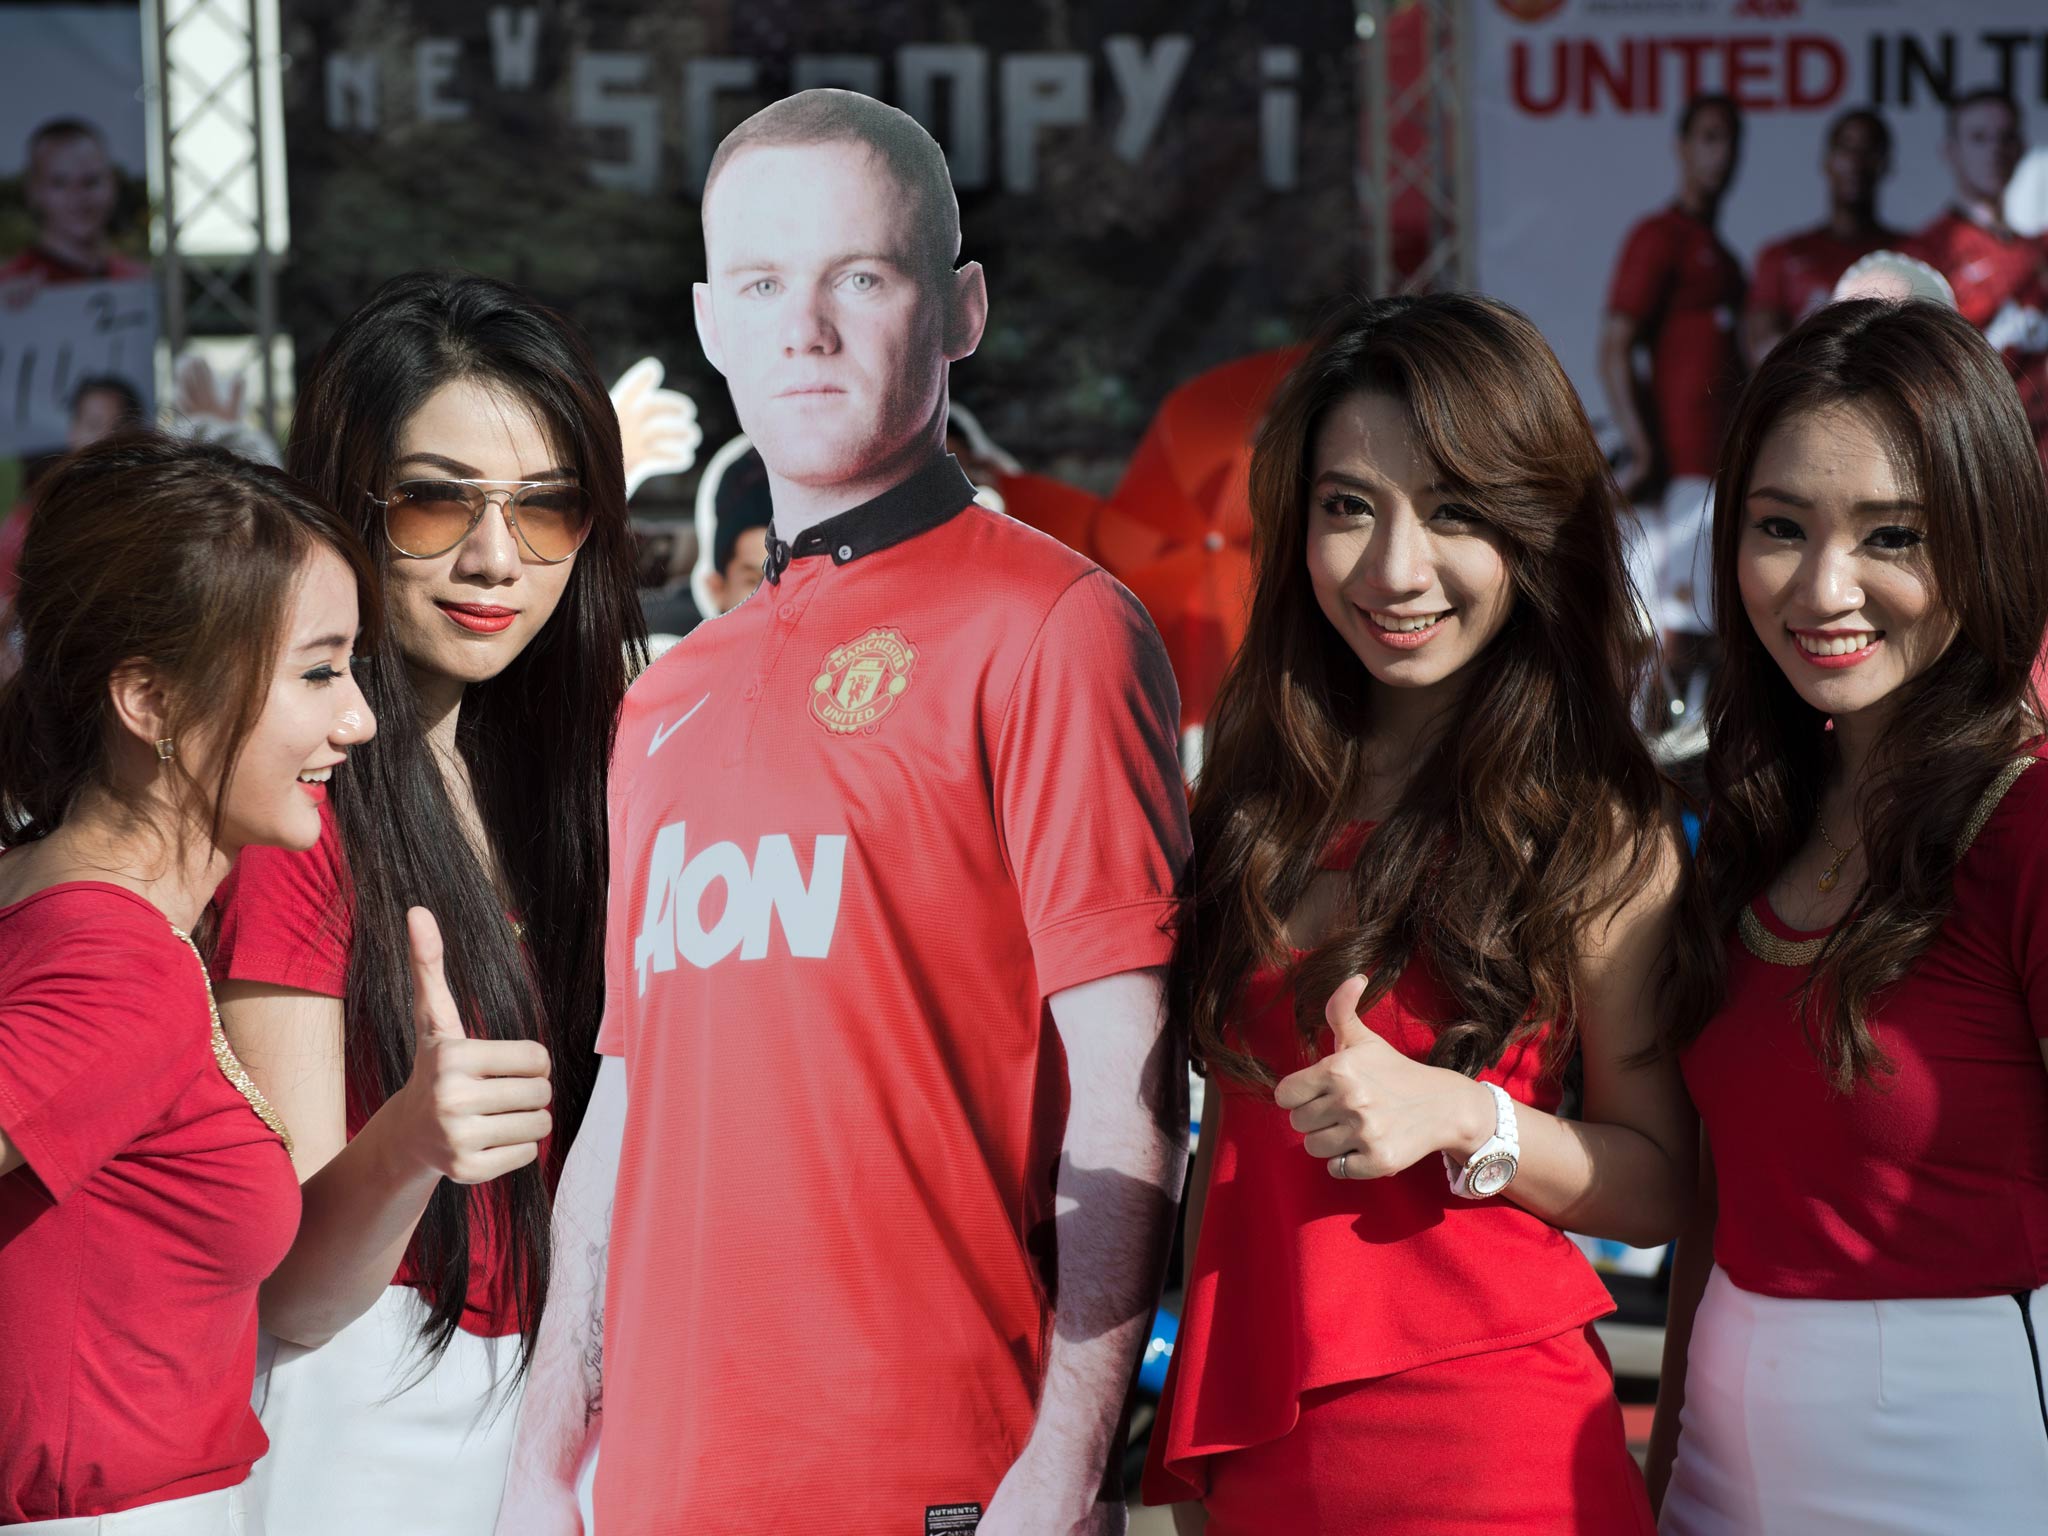 Wayne Rooney is replaced by a cardboard cut-out on United's tour